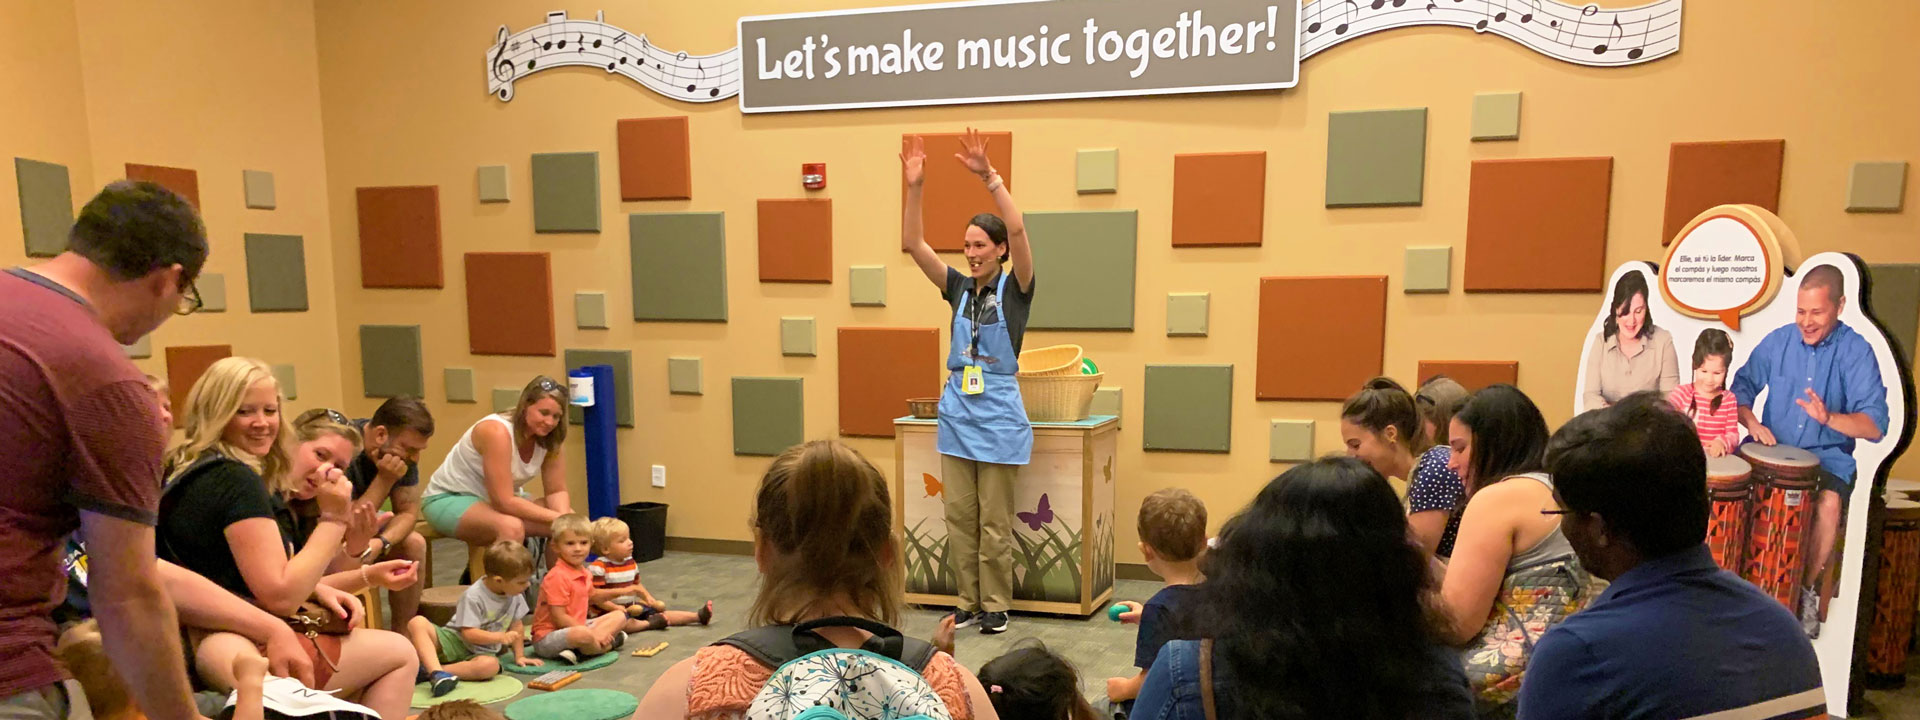 Making Music Together class at the Children's Museum of Indianapolis